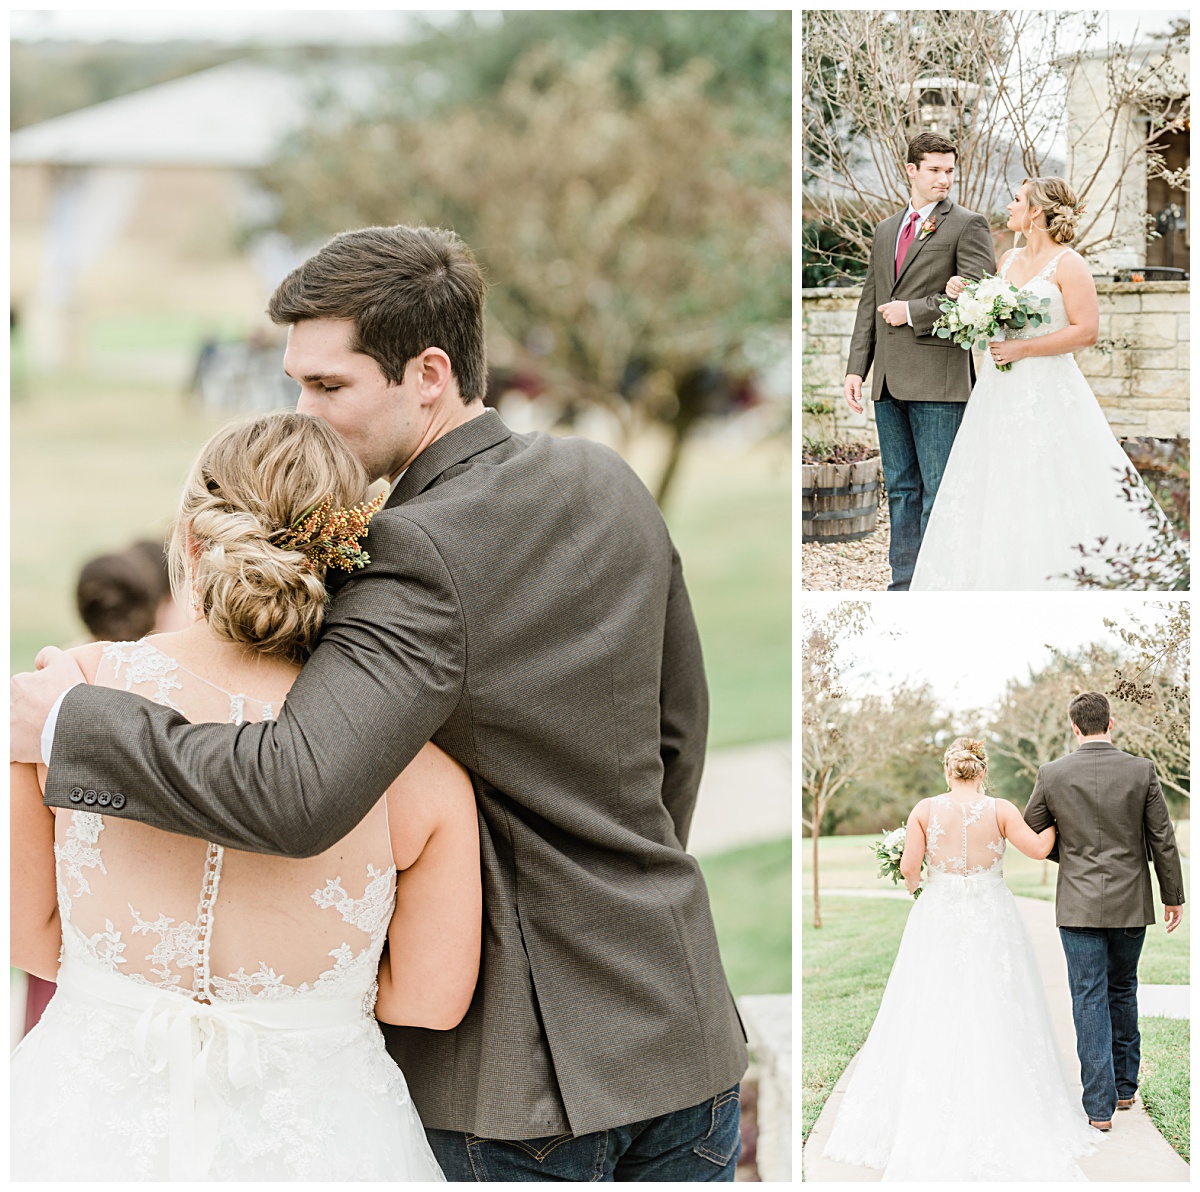 Emotional moment with the Brides Brother | A walk down the aisle at Emery's Buffalo Creek 